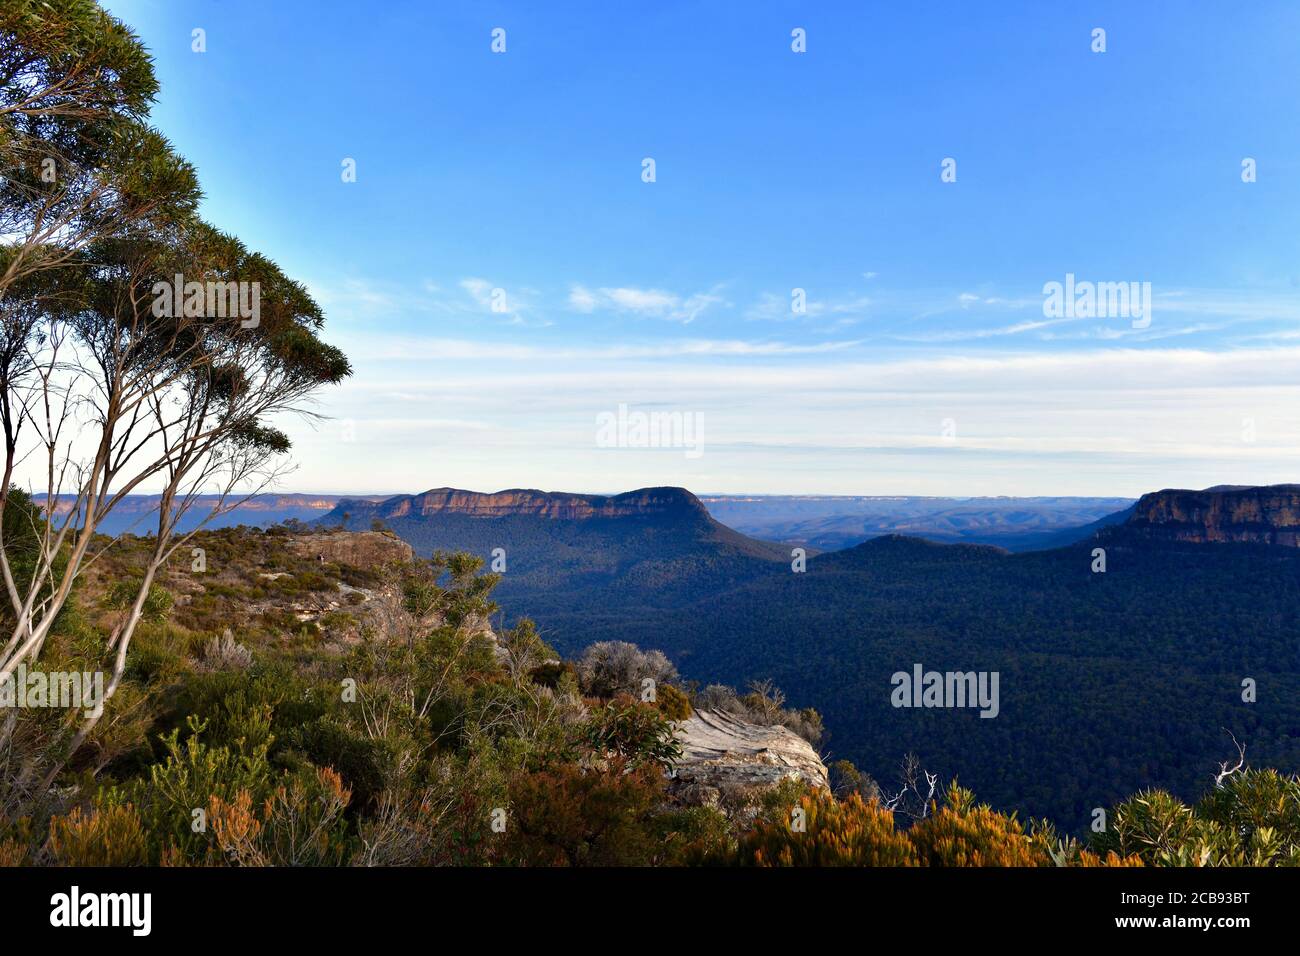 A view of the Blue Mountains as seen from Landslide Rock at Katoomba Stock Photo